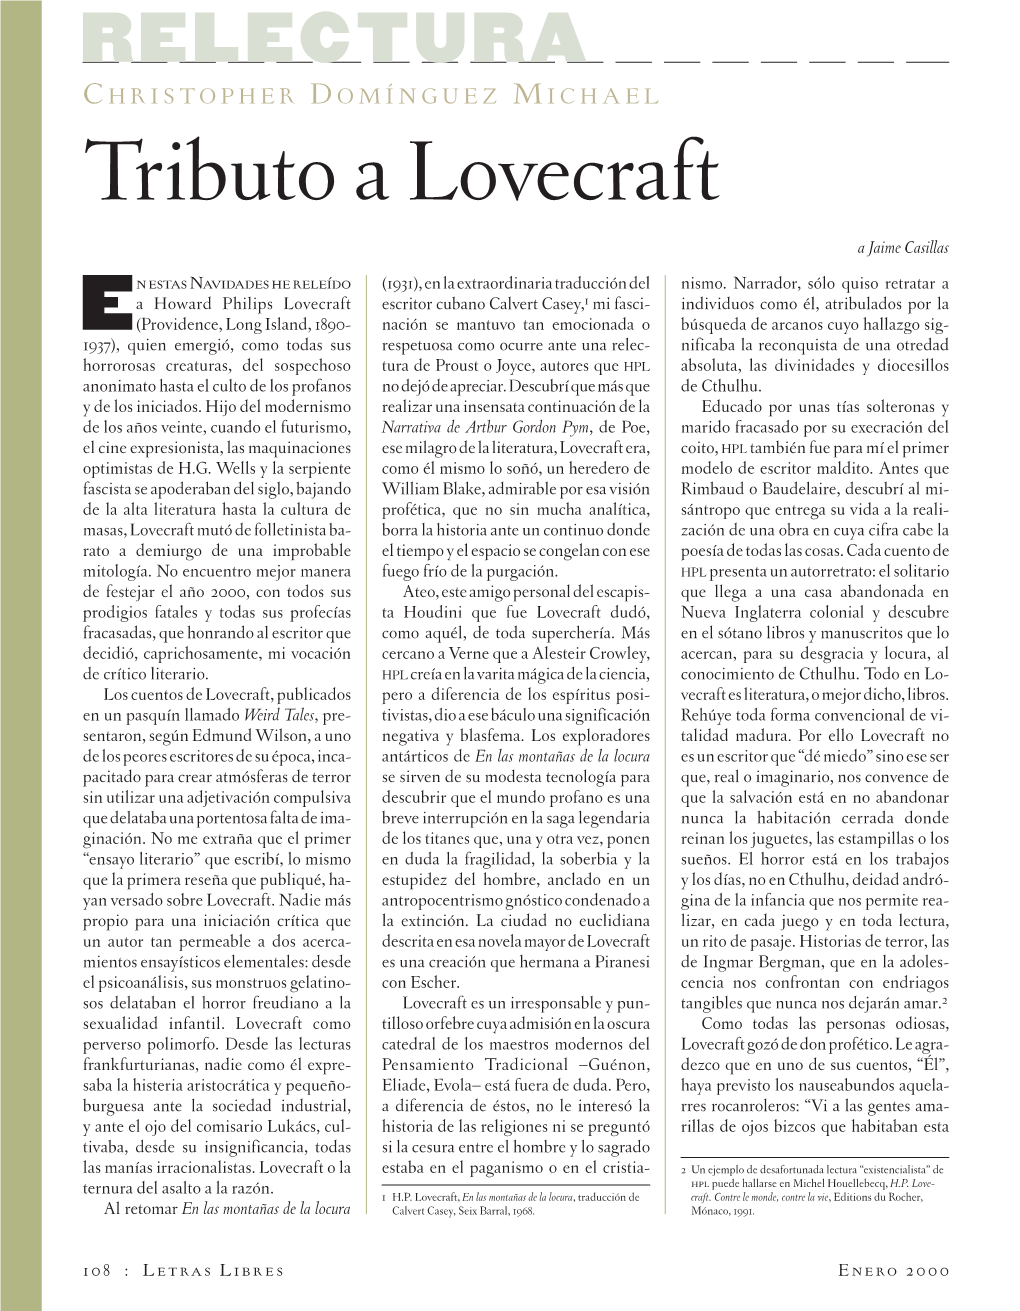 Tributo a Lovecraft